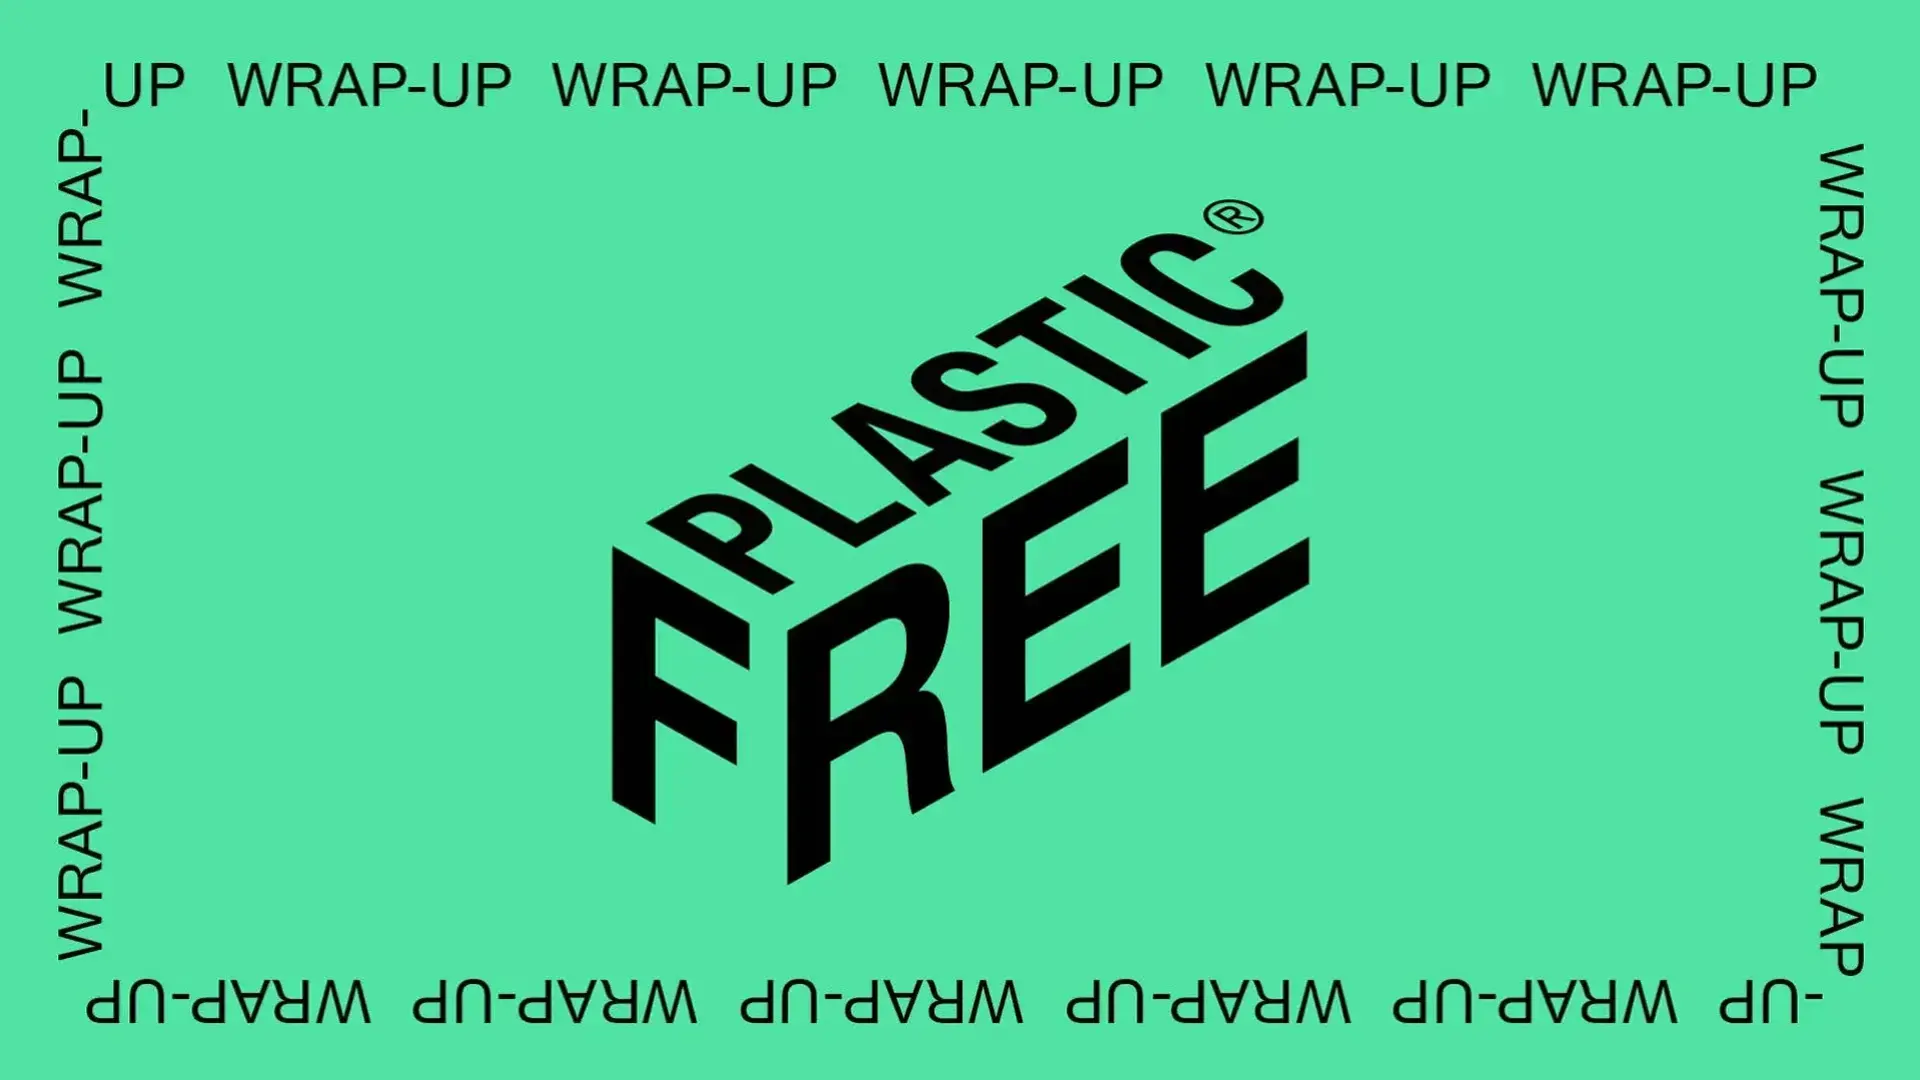 PlasticFree September Wrap-Up: Modular Blenders, Luxe Aluminum, and a Landfill-Diverting Make-Up Brand